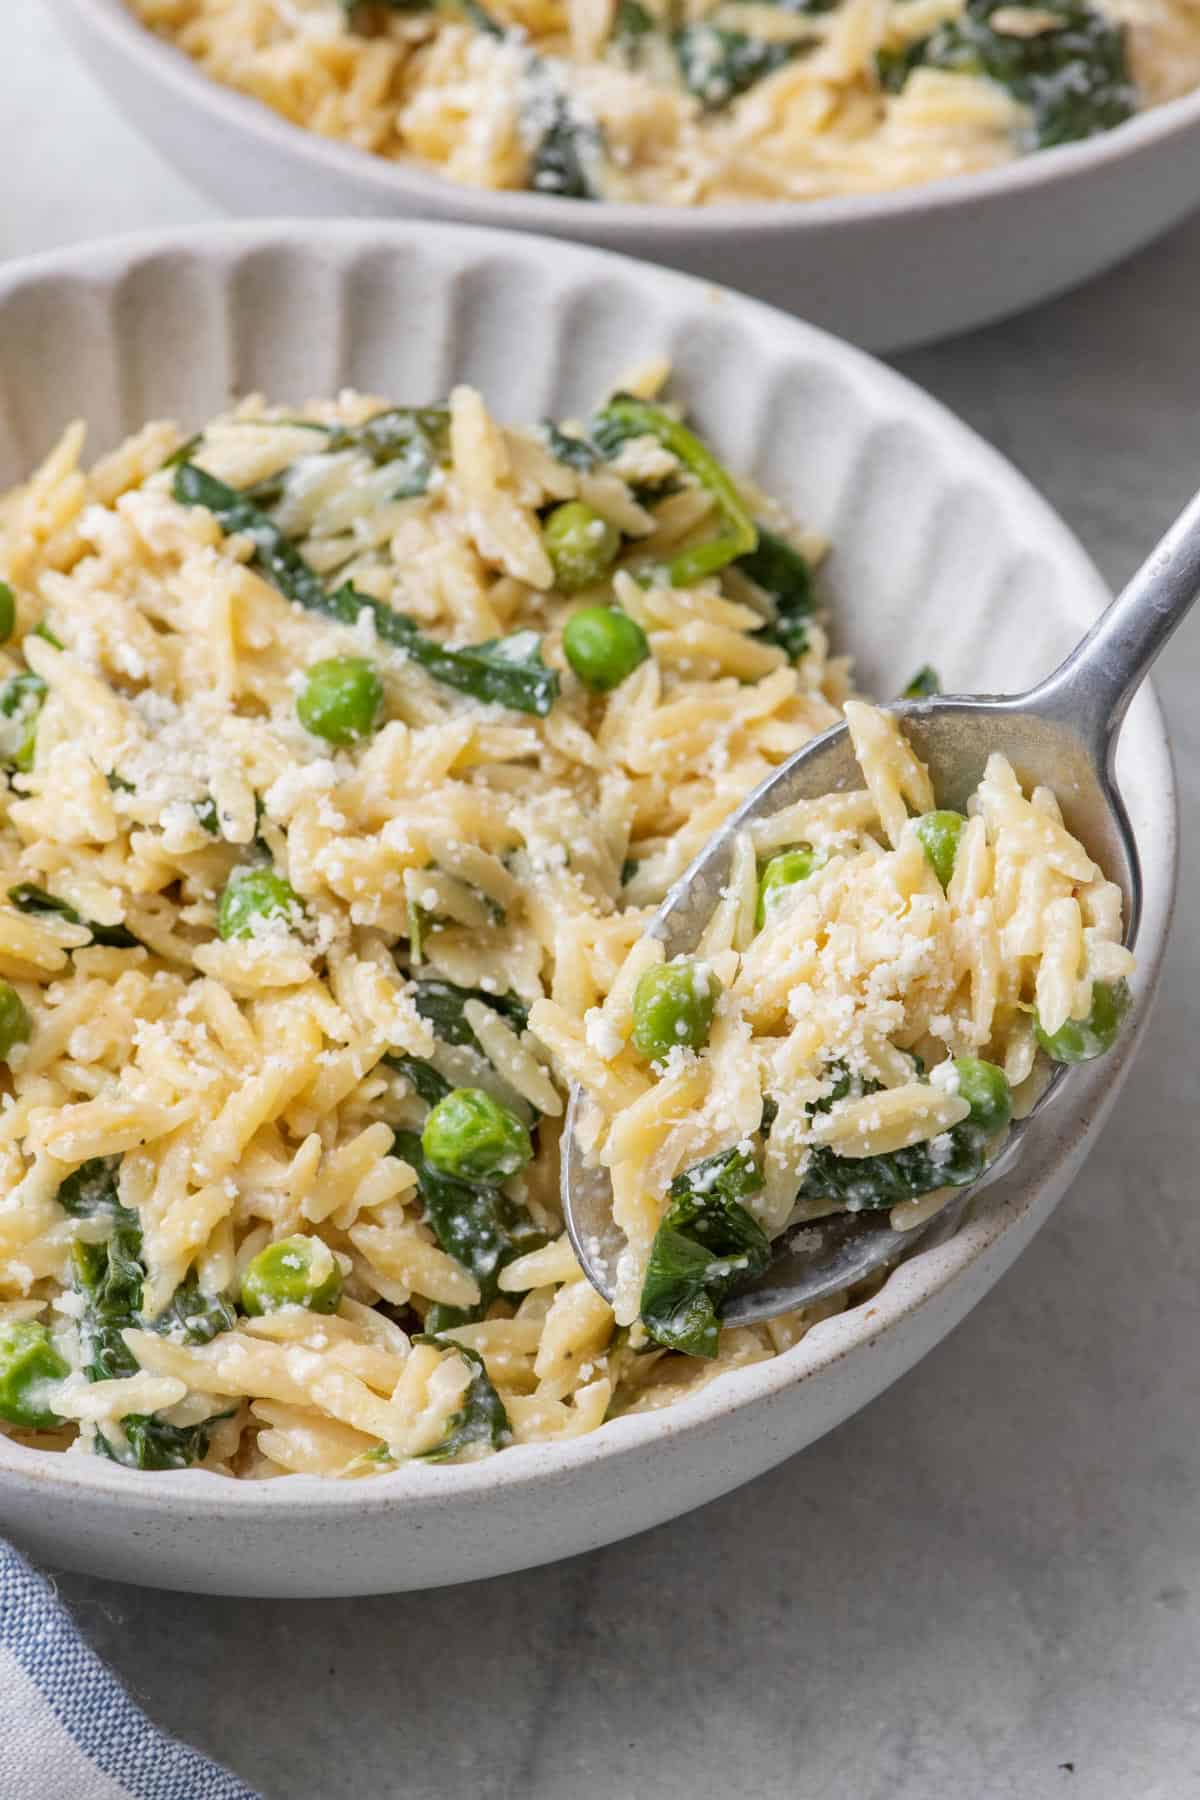 Spoon lifting up a bite of cheesy lemon orzo with peas.